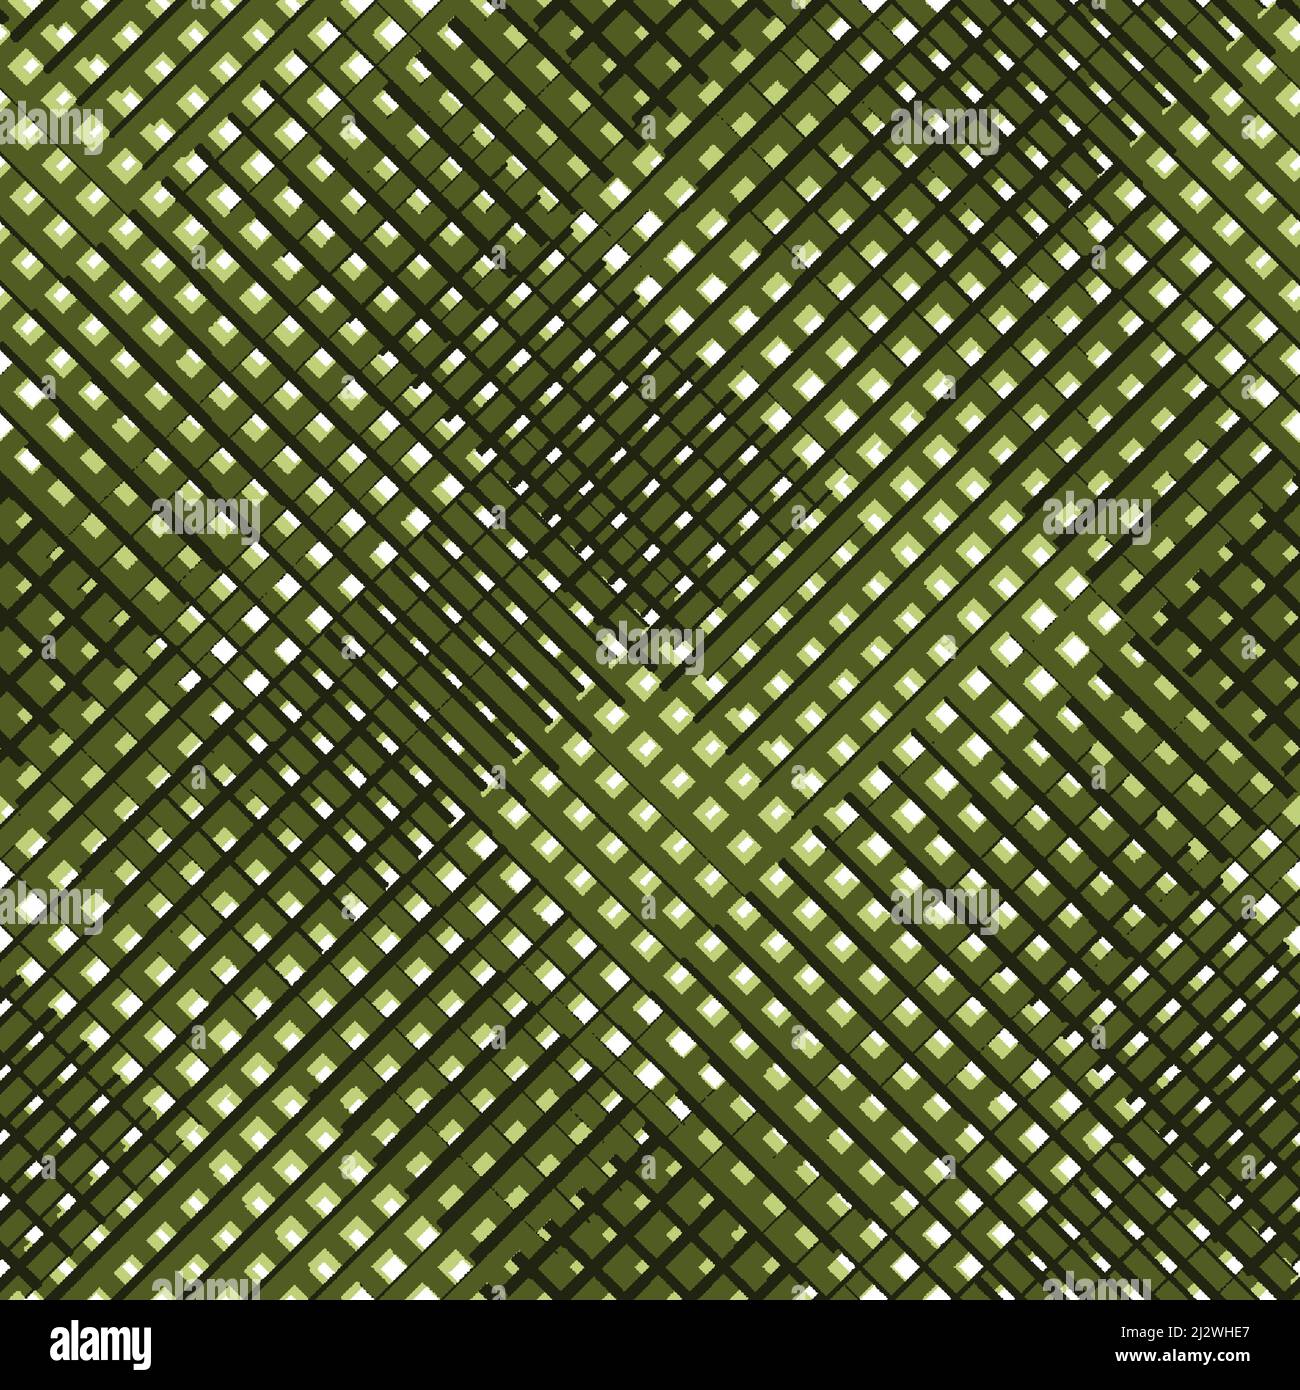 Seamless Illusion Graphical lines and checks grille Pattern Stock Photo